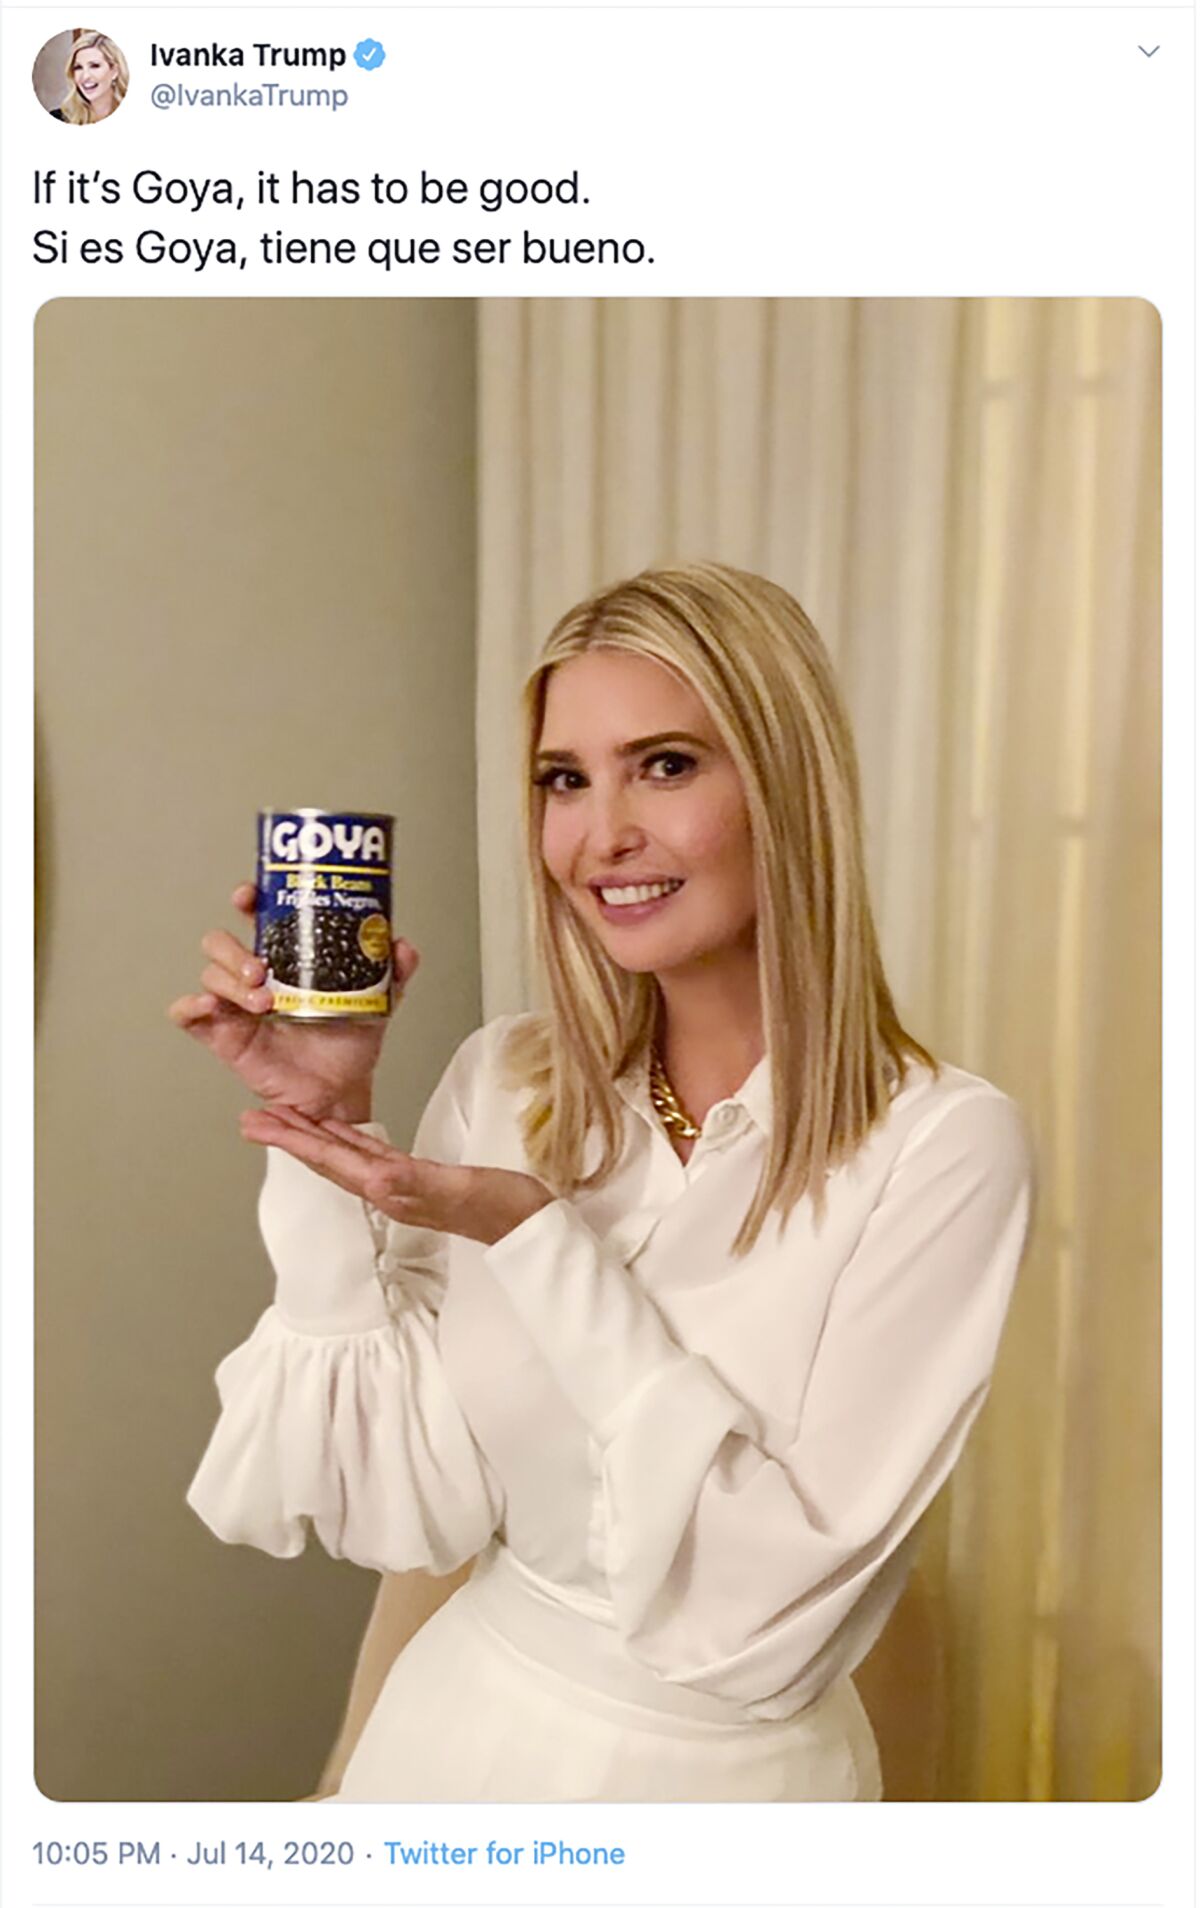 This image taken from Ivanka Trump's Twitter account shows her holding a can of Goya beans